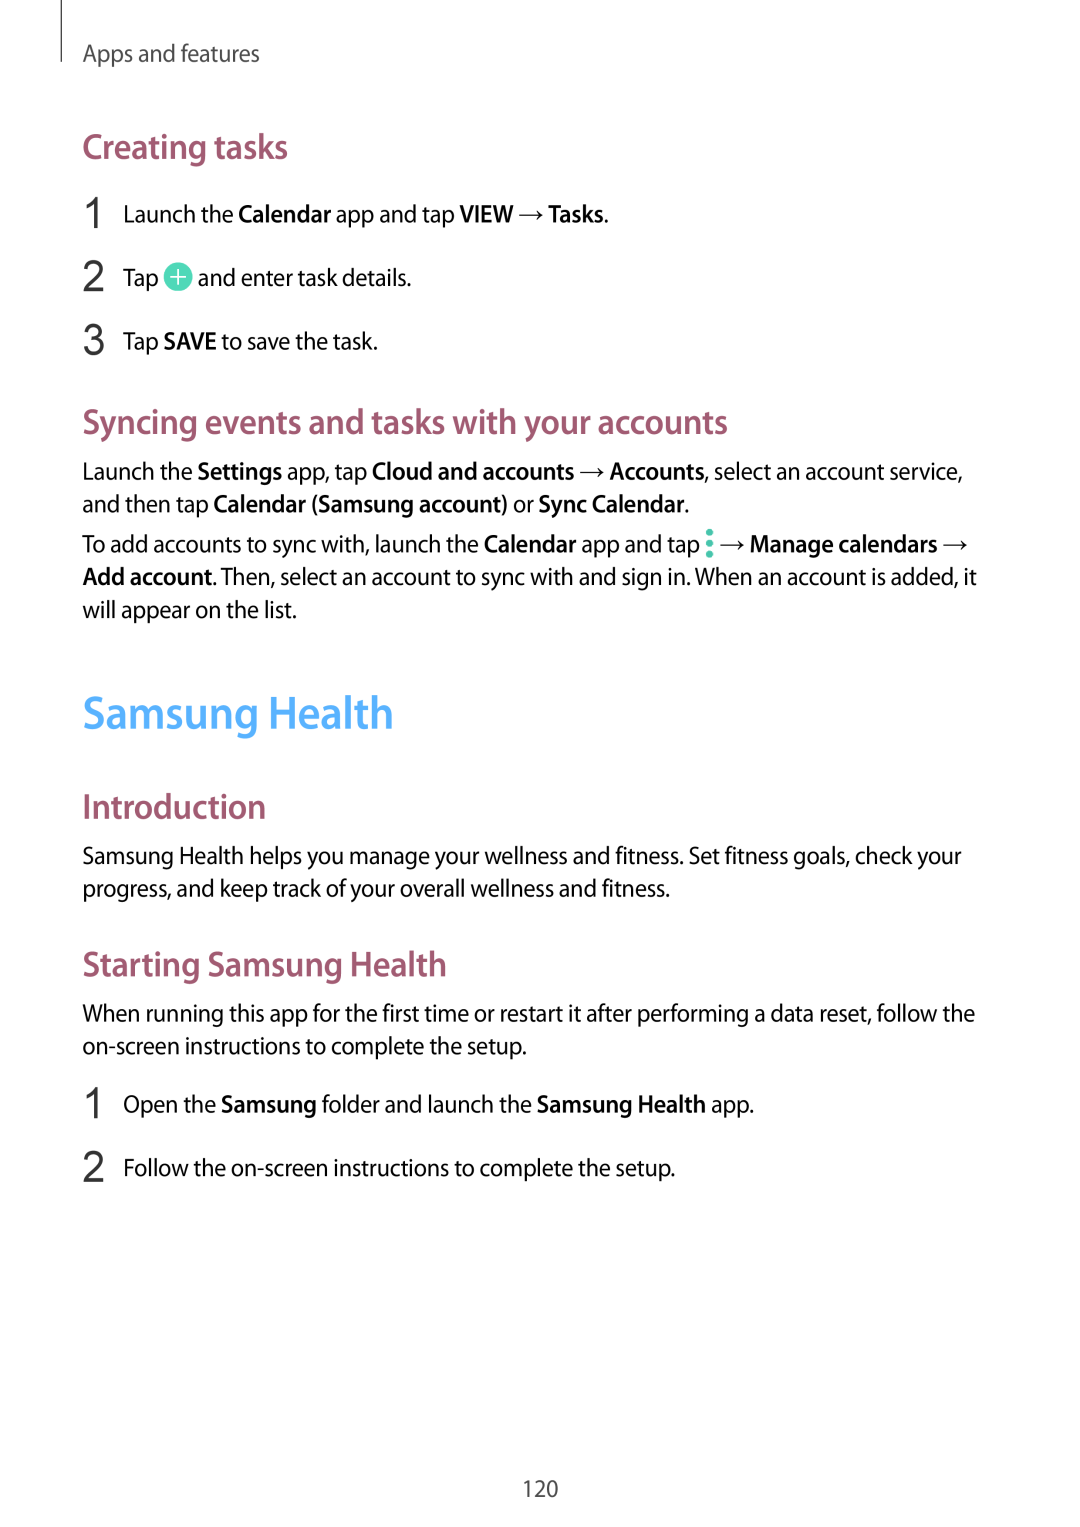 Samsung SM-A530FZKAPAN manual Samsung Health, Creating tasks, Syncing events and tasks with your accounts, Introduction 